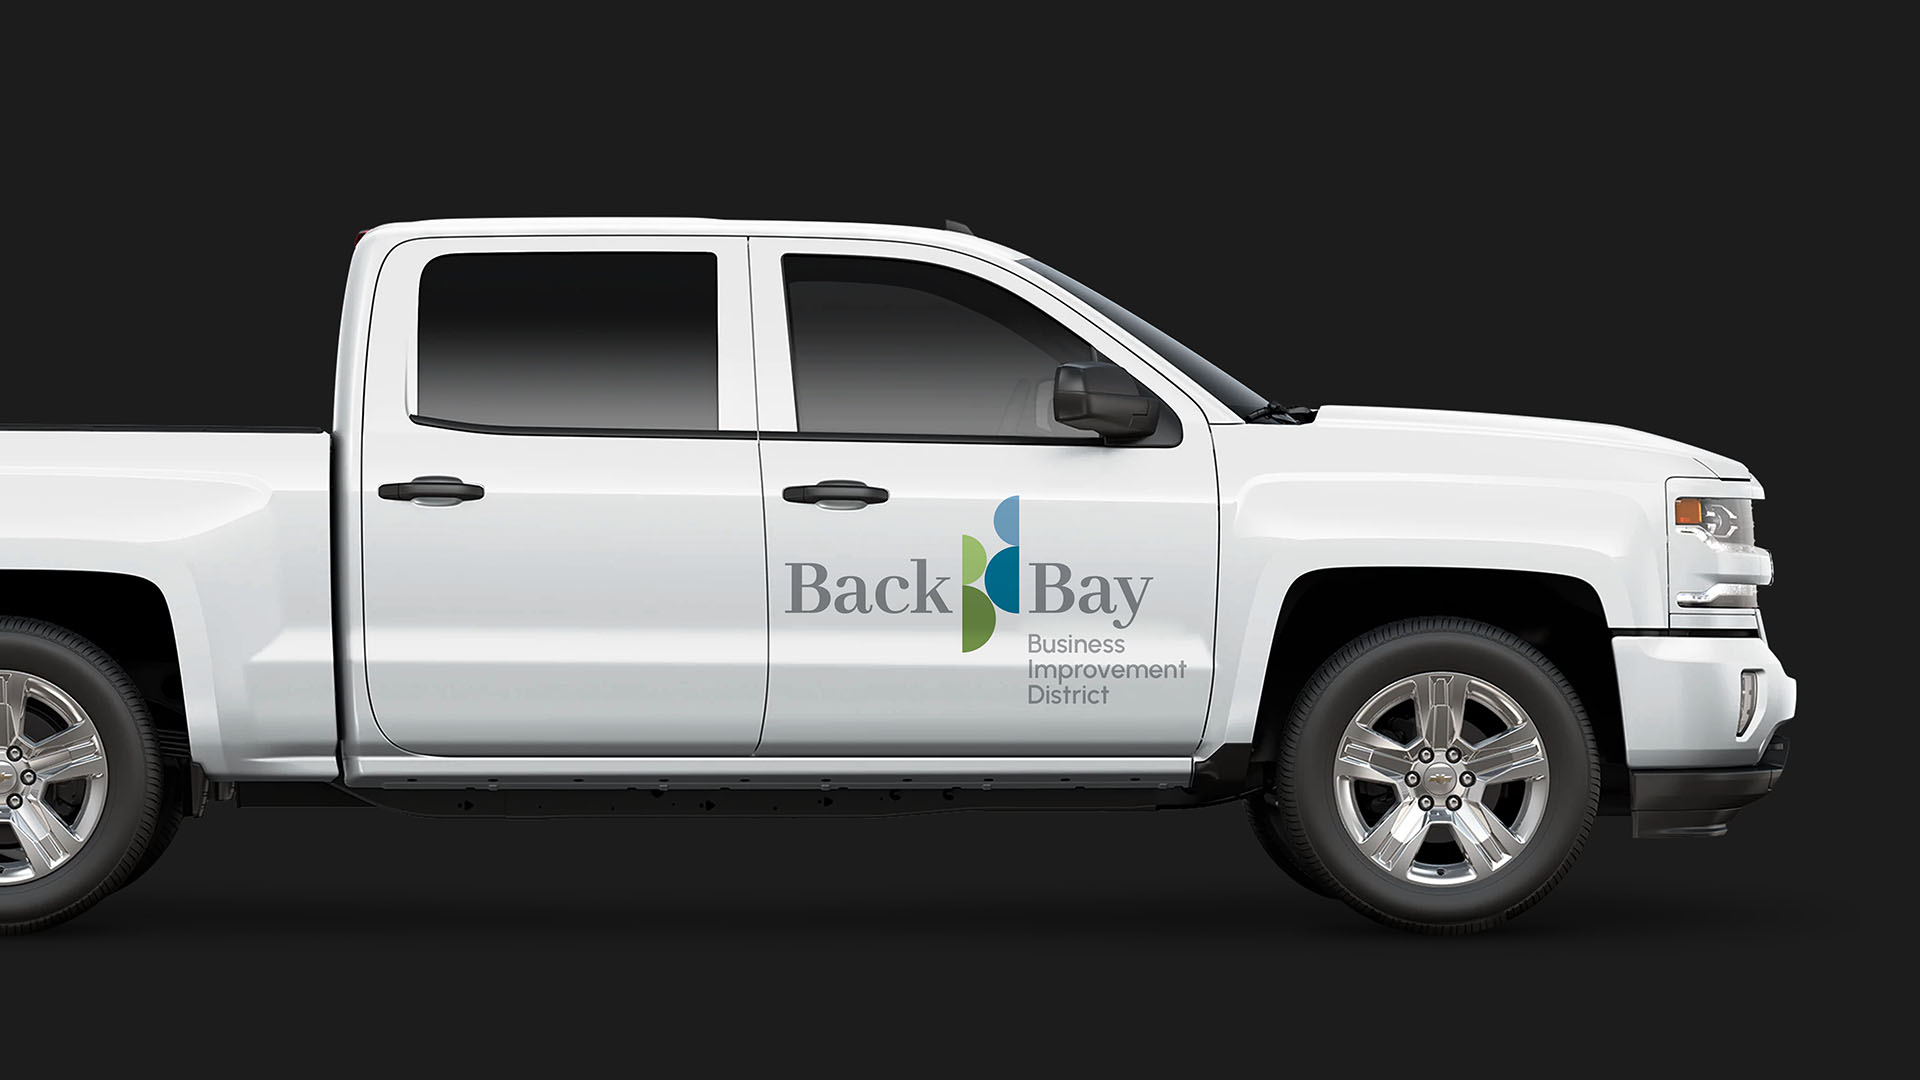 back bay business improvement district logo on white truck